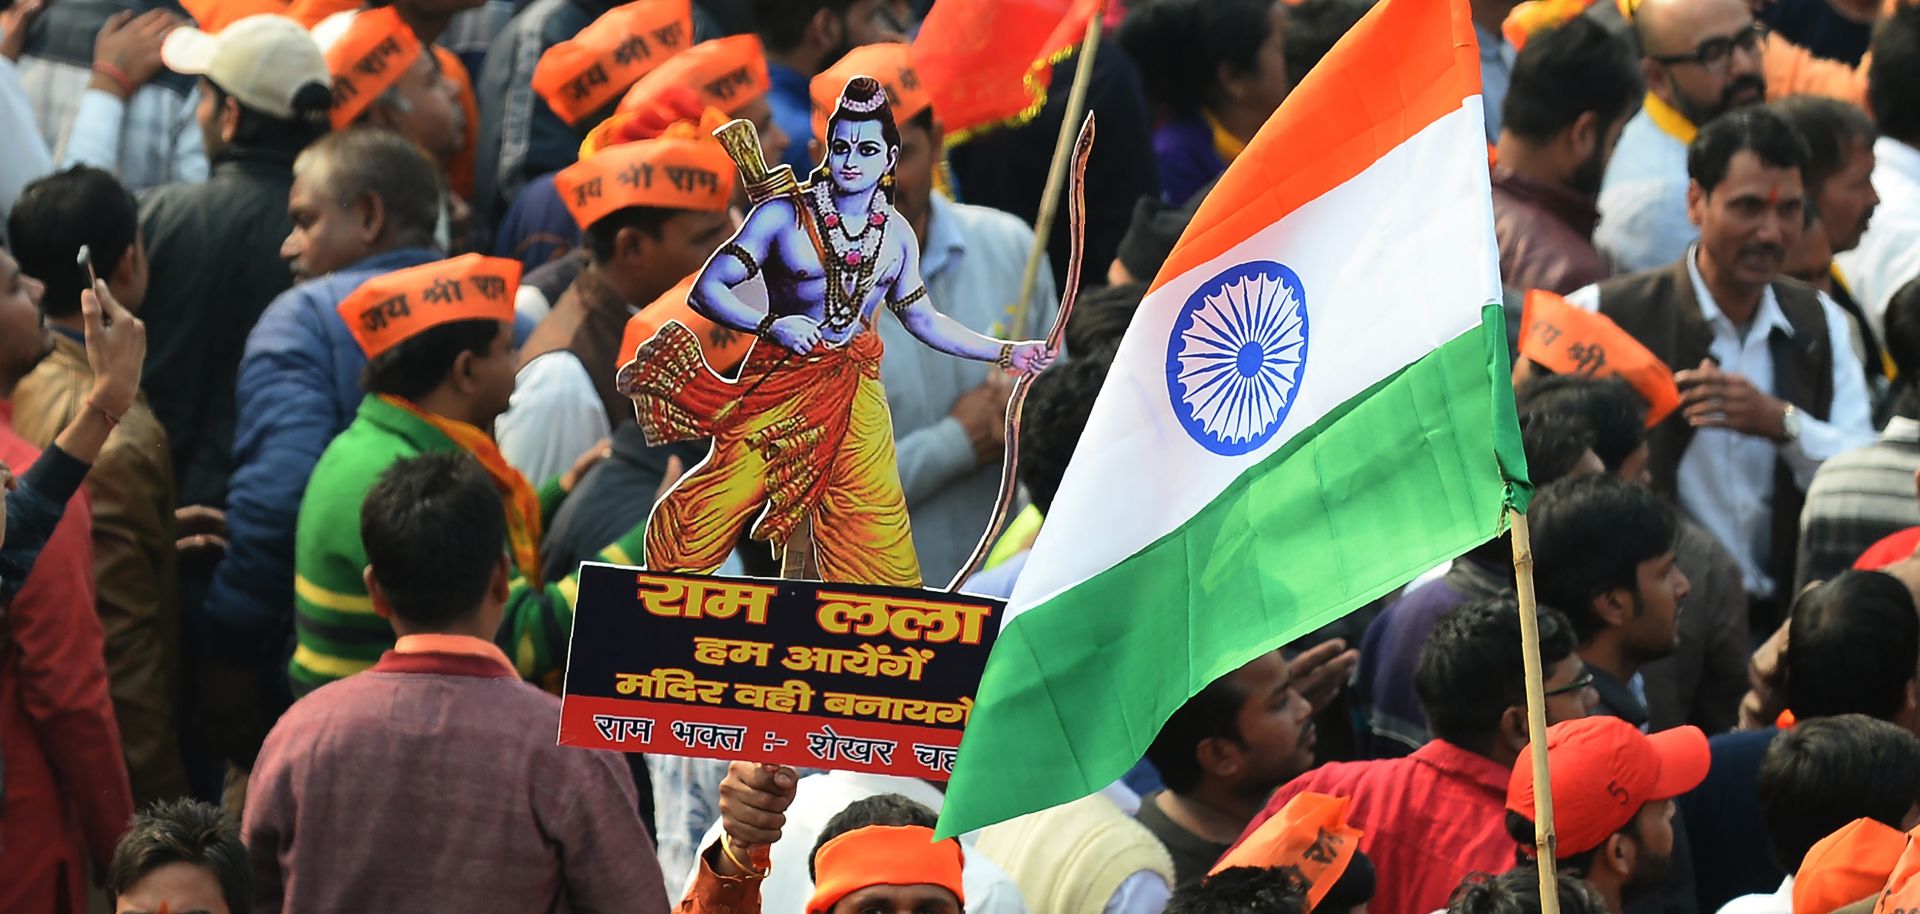 A Dec. 9, 2018, rally in New Delhi calling for the construction of a Hindu temple on the site of the demolished Babri Mosque.